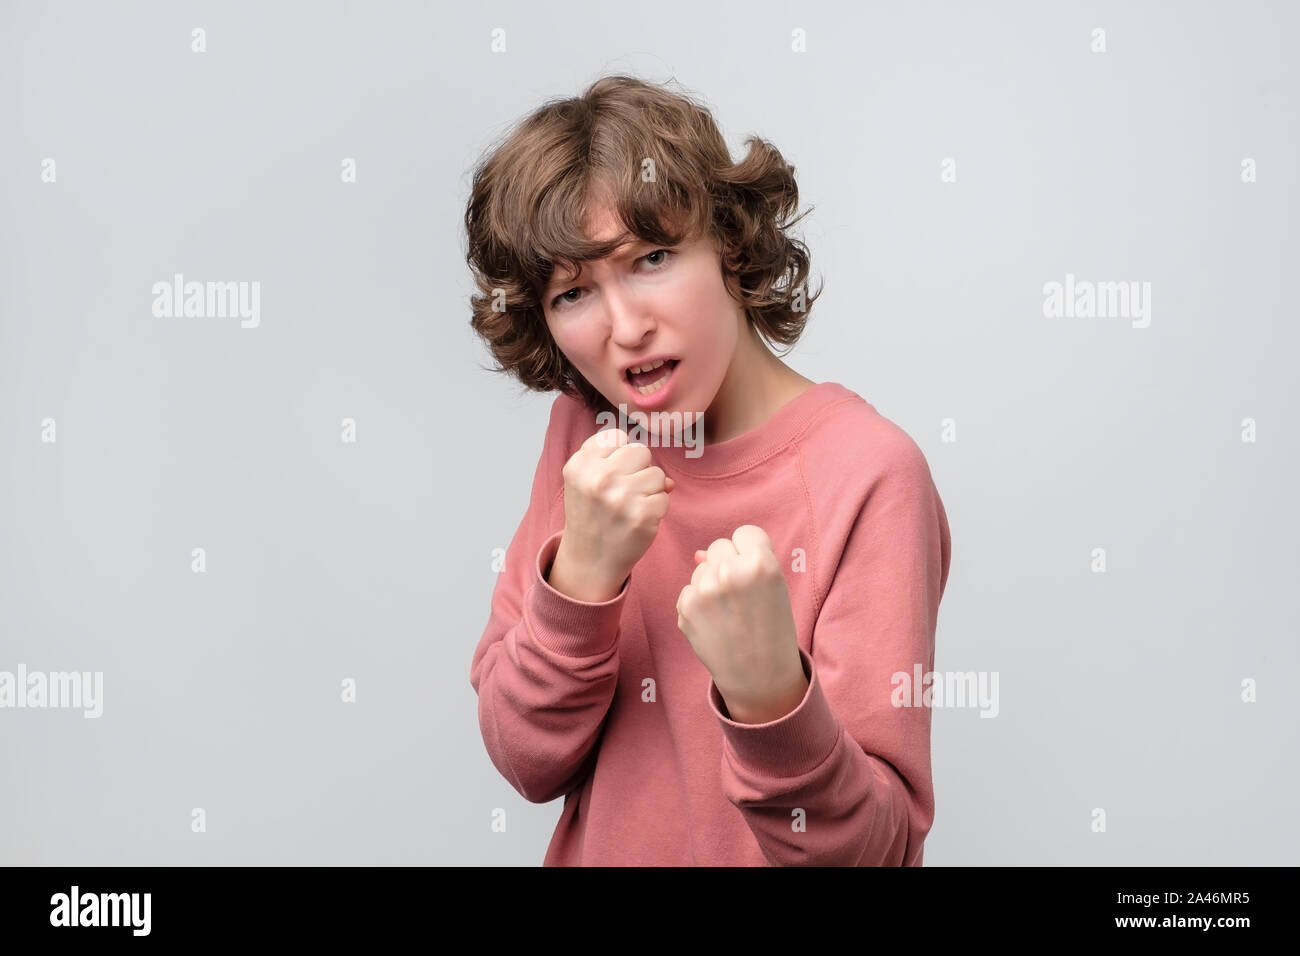 Strong woman keeping fists clenched in front of her defending herself Stock Photo